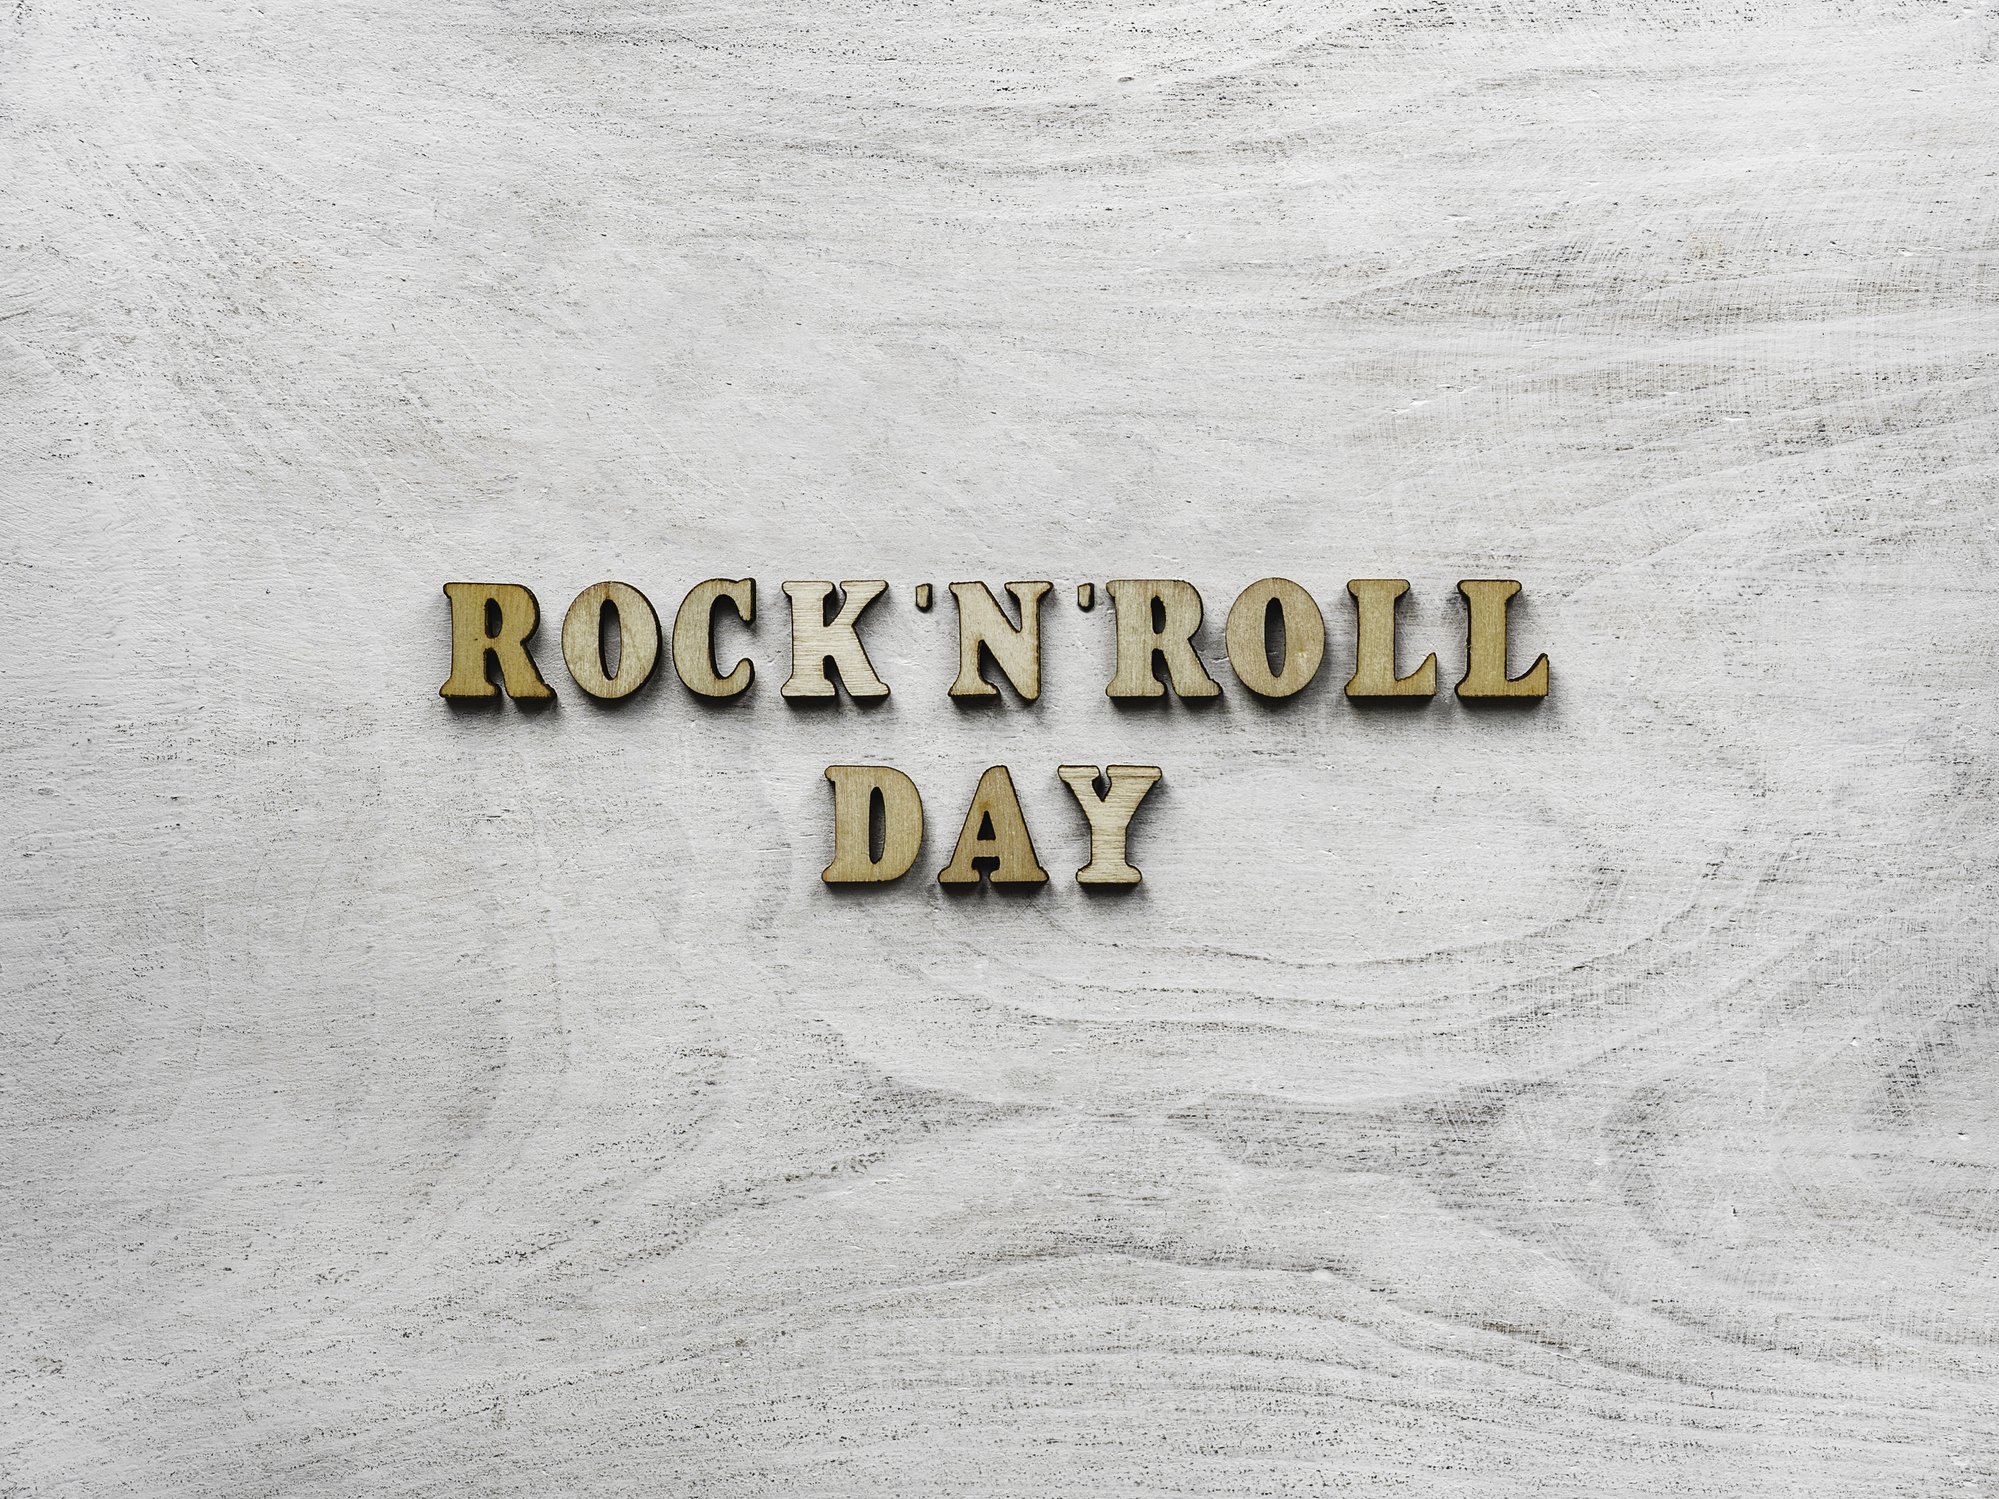 A photo card showing Happy ROCK 'N' ROLL DAY. | Photo: Getty Images